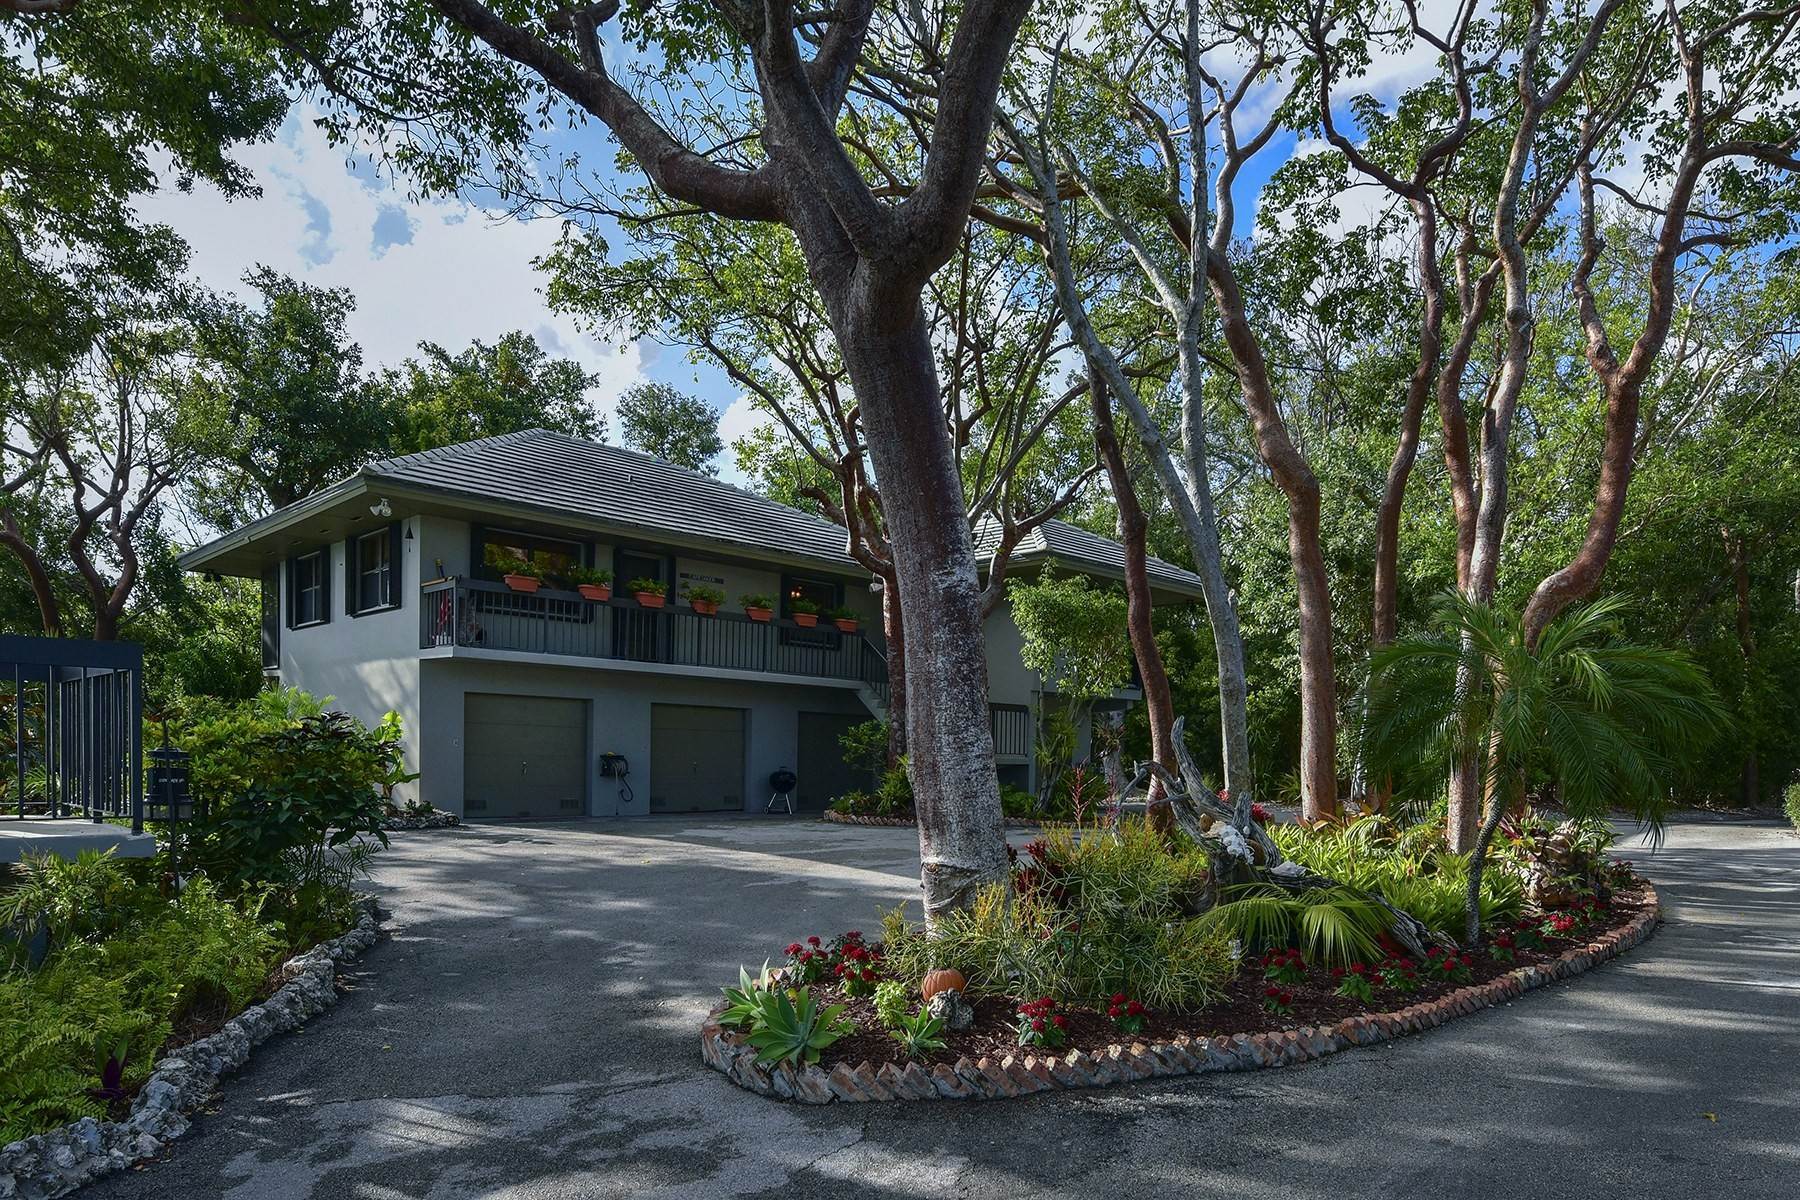 21. Property for Sale at Pumpkin Key - Private Island, Key Largo, FL Pumpkin Key - Private Island Key Largo, Florida 33037 United States